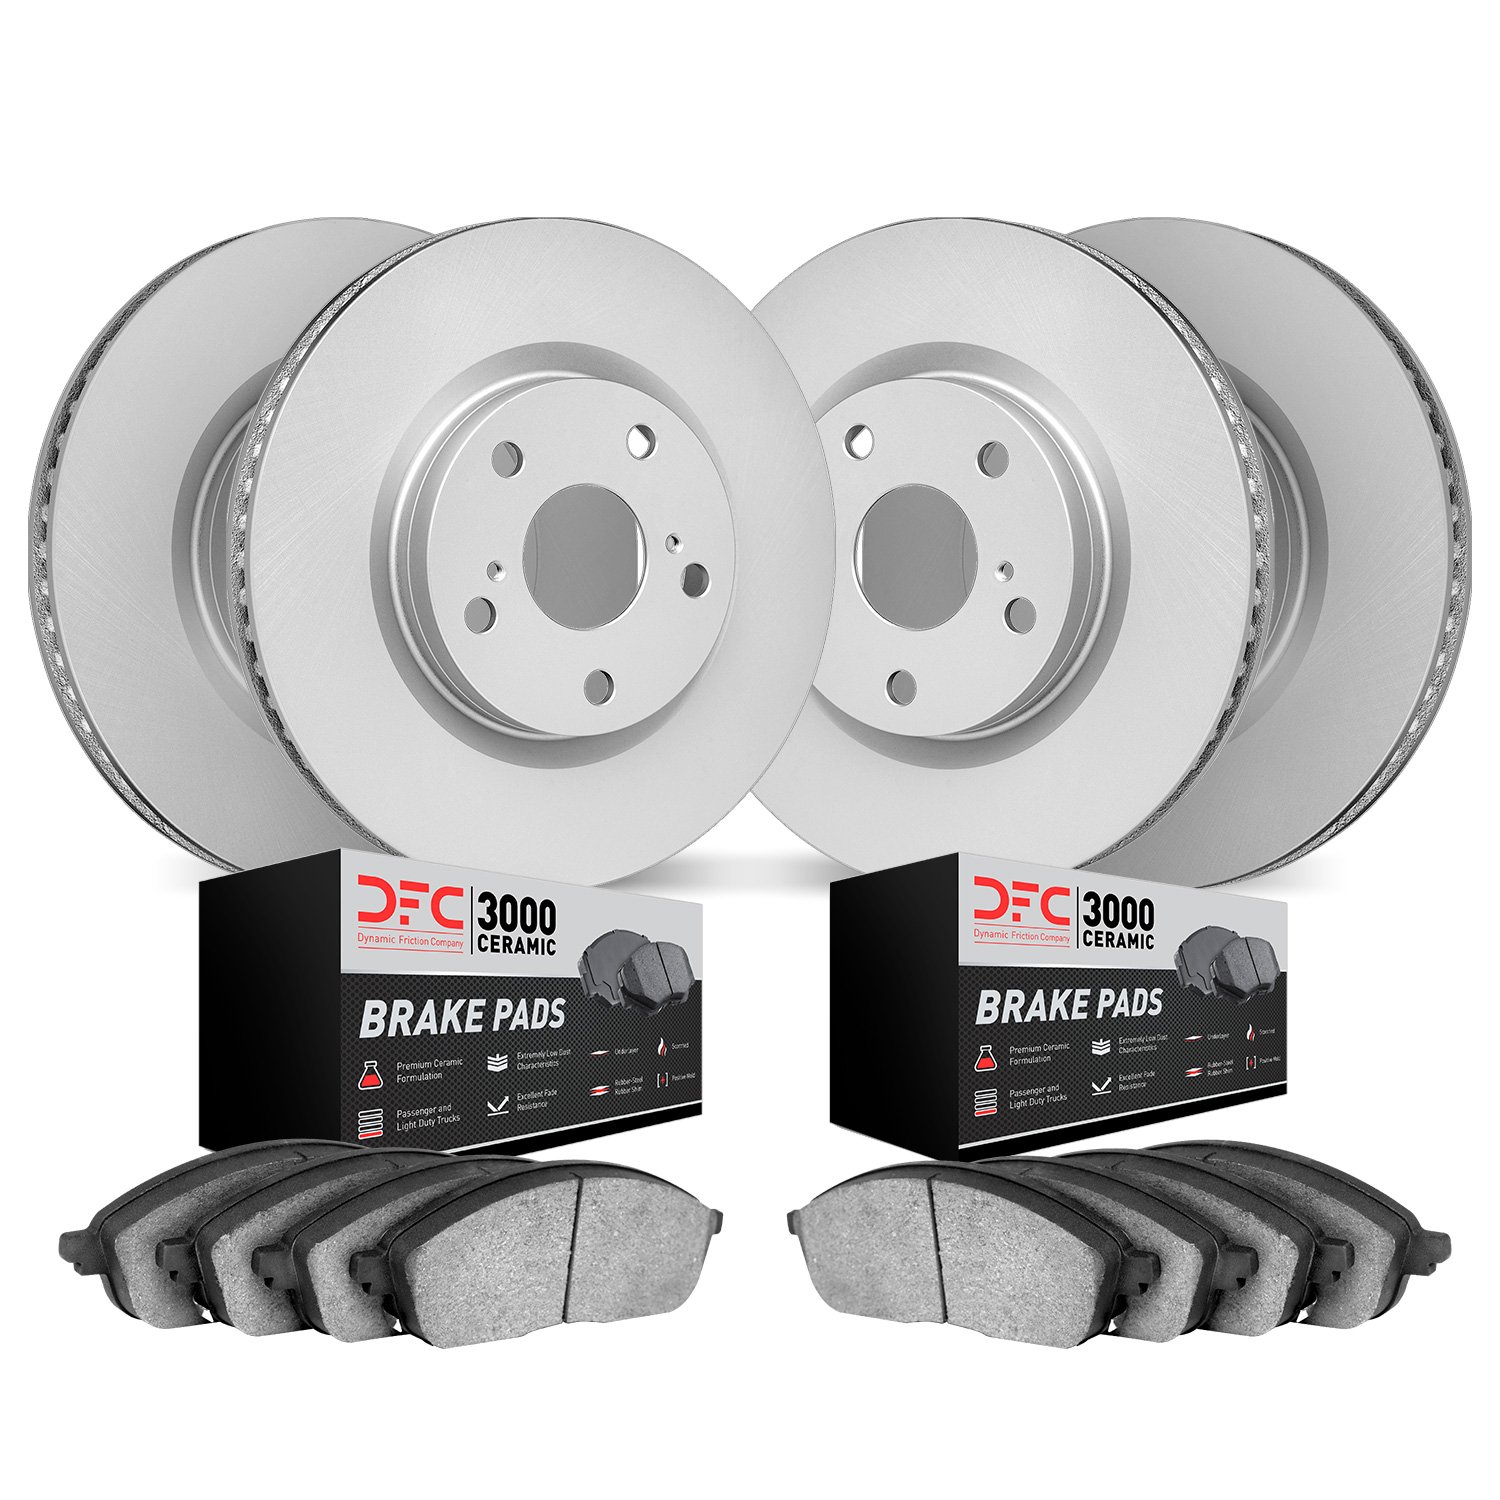 4304-42022 Geospec Brake Rotors with 3000-Series Ceramic Brake Pads Kit, Fits Select Mopar, Position: Front and Rear